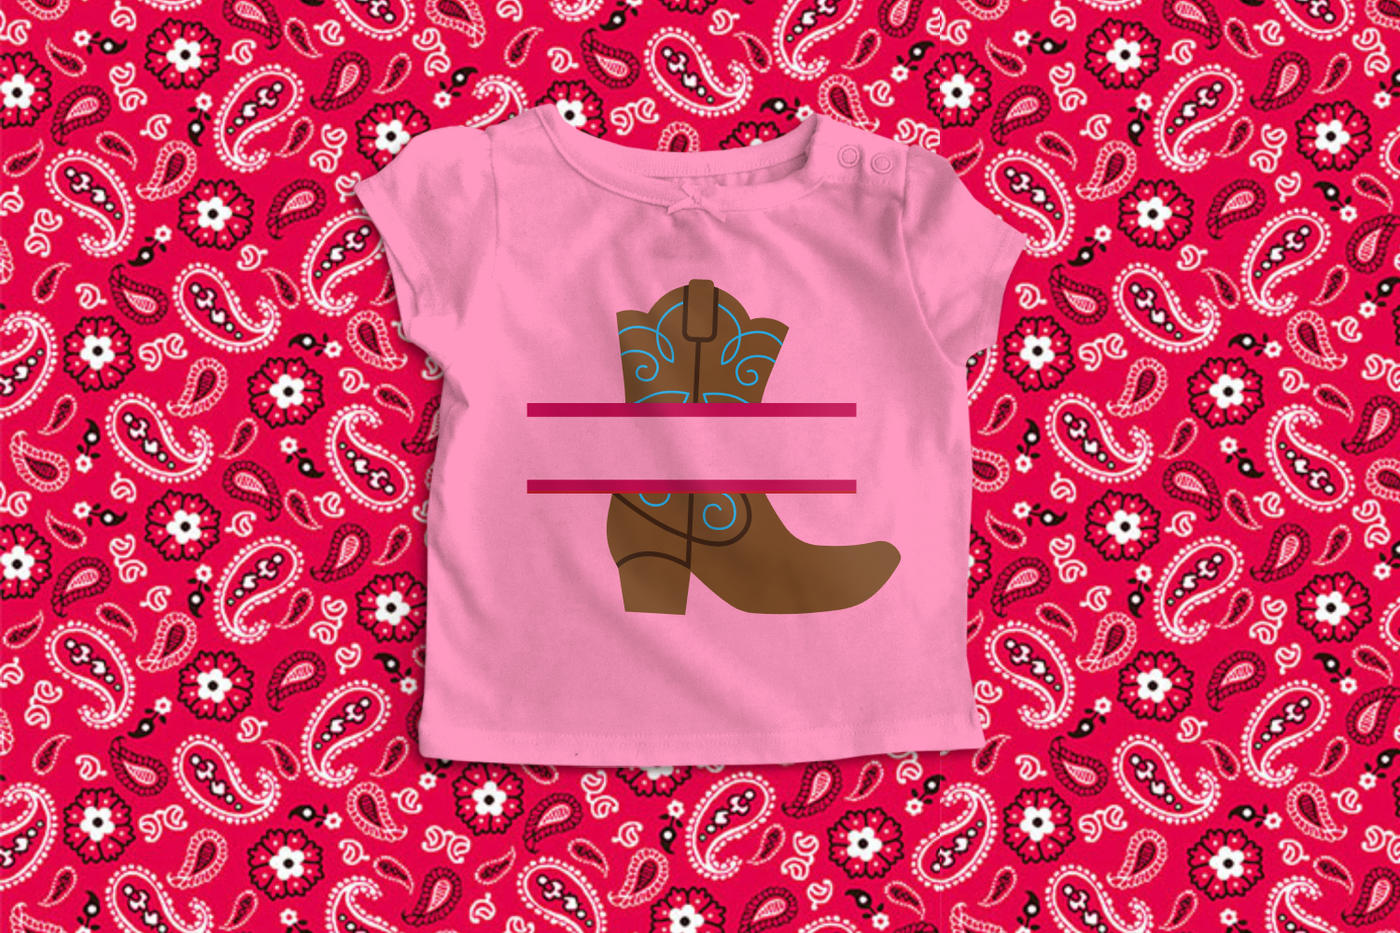 A pink tee with a fancy western boot on it with a split in the middle.